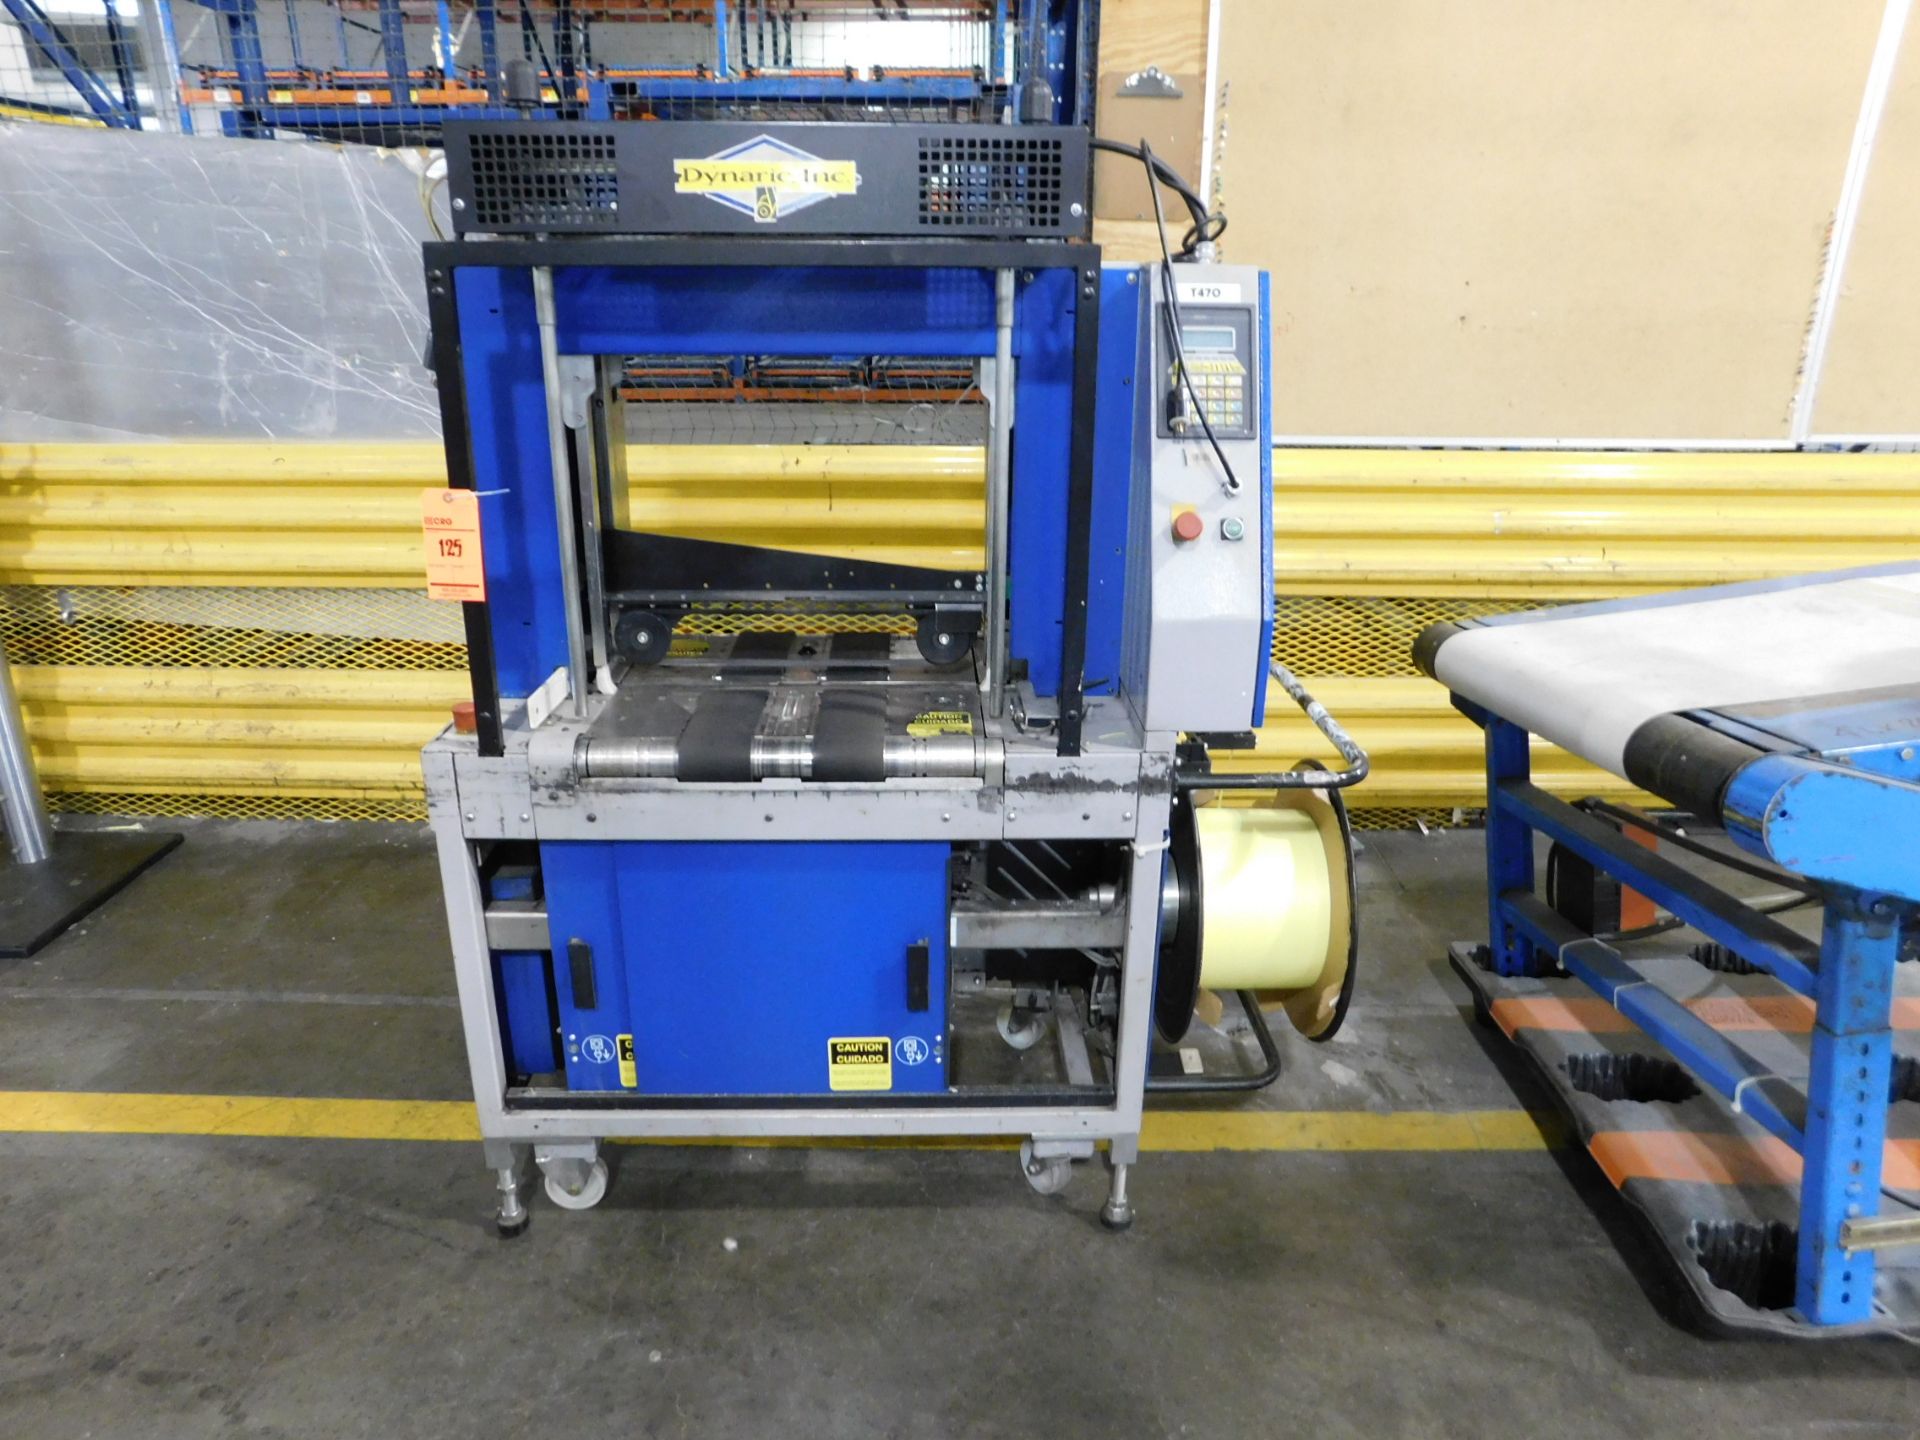 2000 Dynark banding machine with discharge roller conveyor, 5 ft. long by 18 in. wide, asset # T470,